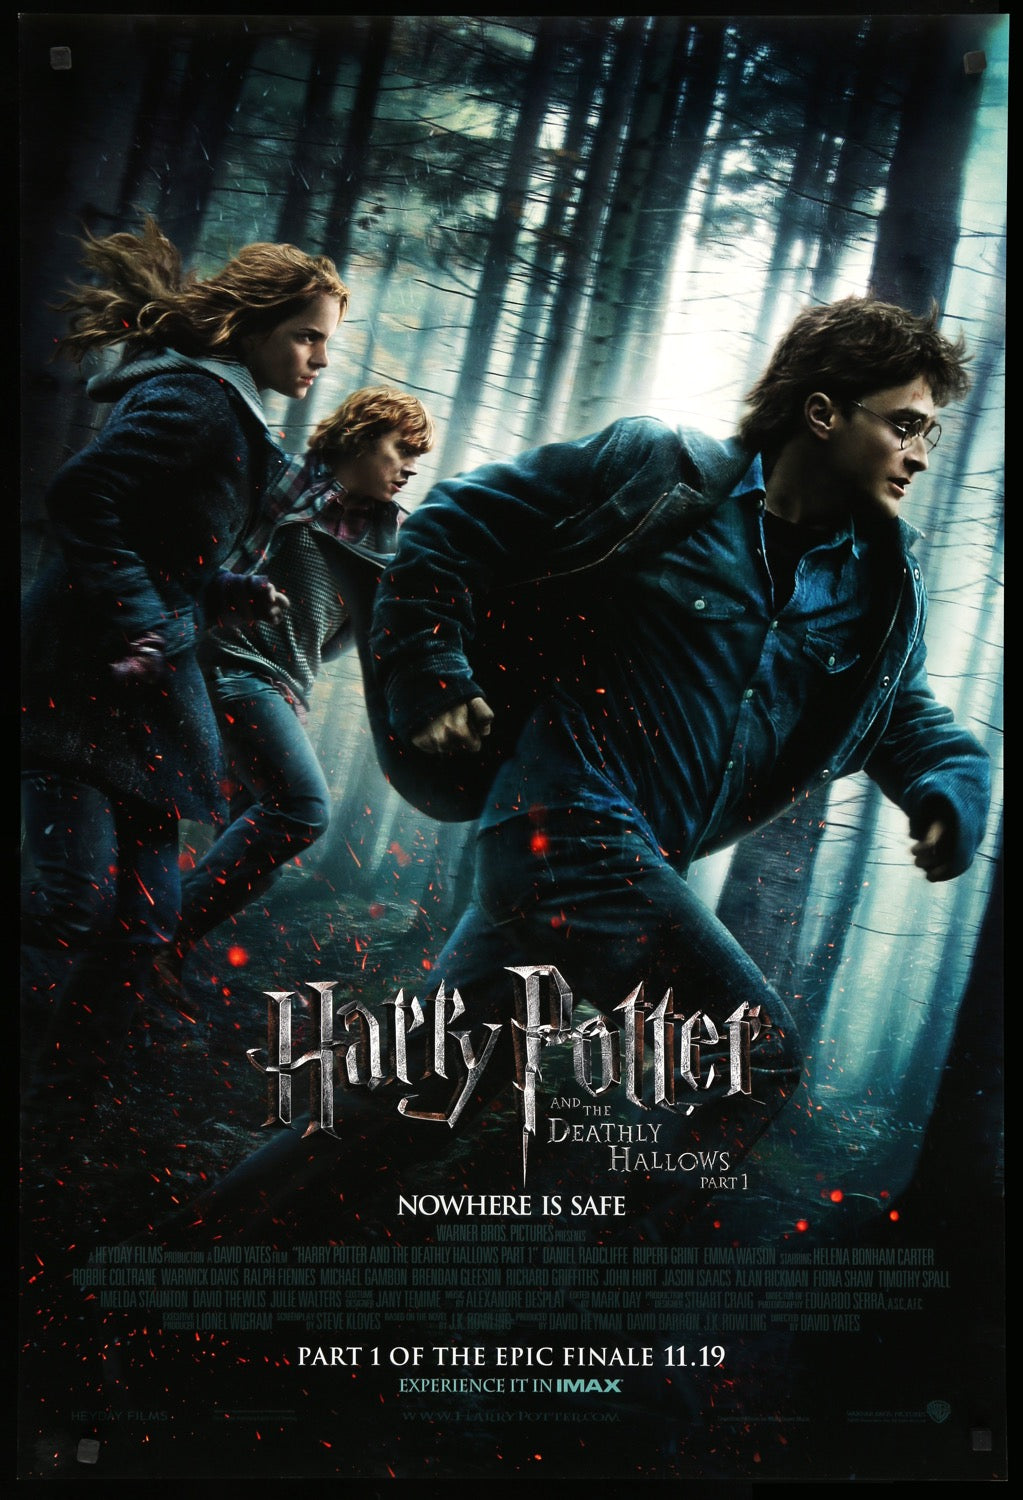 Harry Potter and the Deathly Hallows - Part 1 (2010) original movie poster for sale at Original Film Art